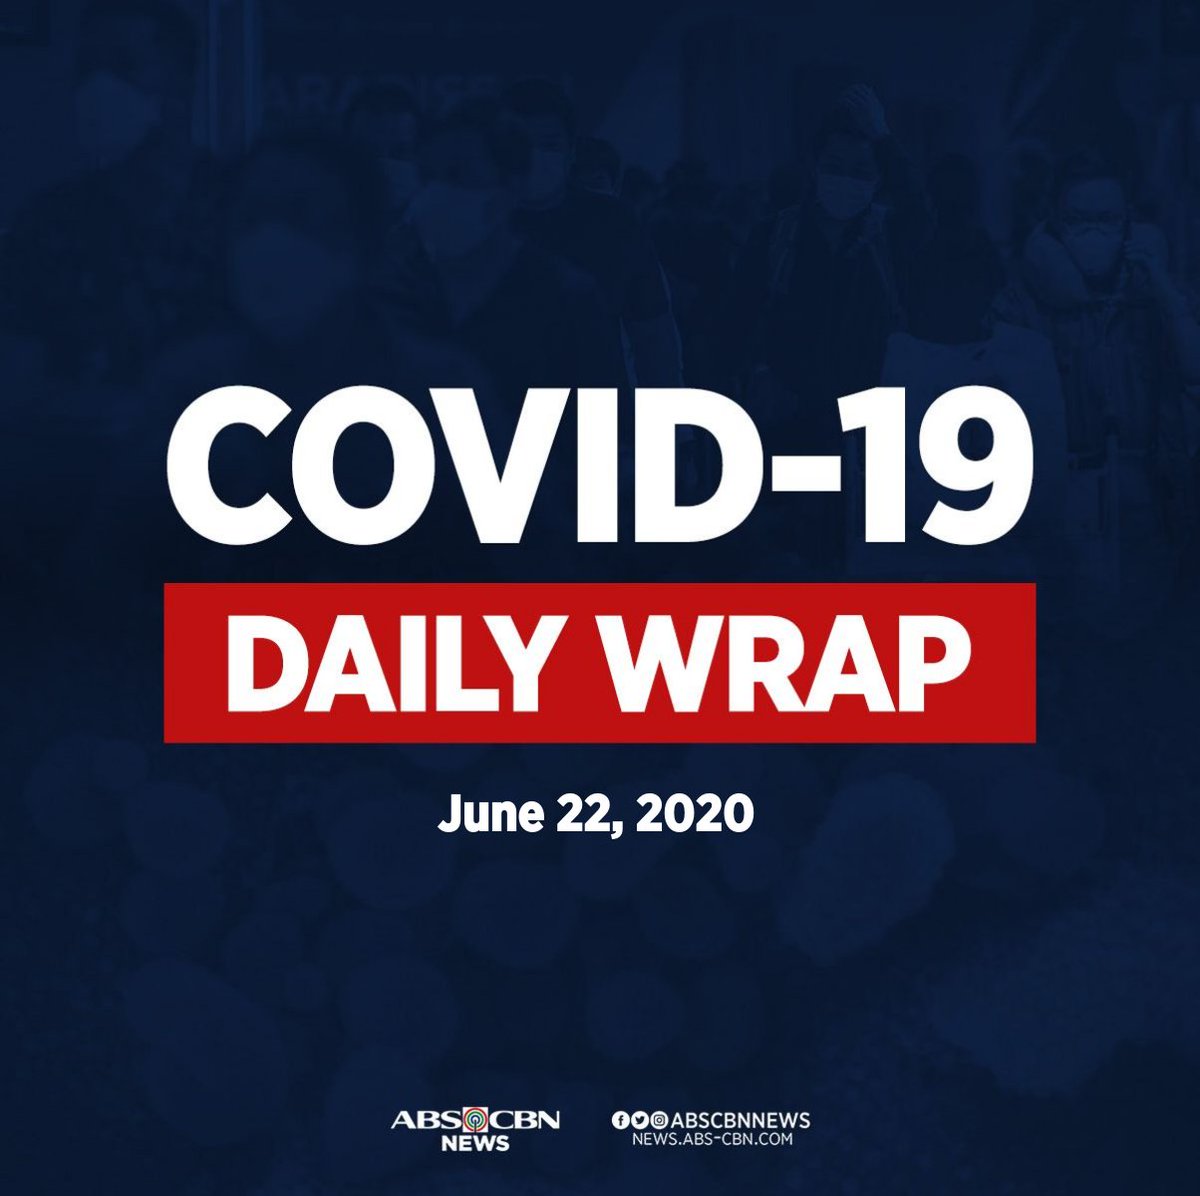 630 ADDITIONAL CASES. As the Philippines continues to navigate the new normal due to the pandemic, additional coronavirus infections in daily reporting remains high, based on the health department's tally. This and more in today's rundown of news on the pandemic (June 22, 2020).